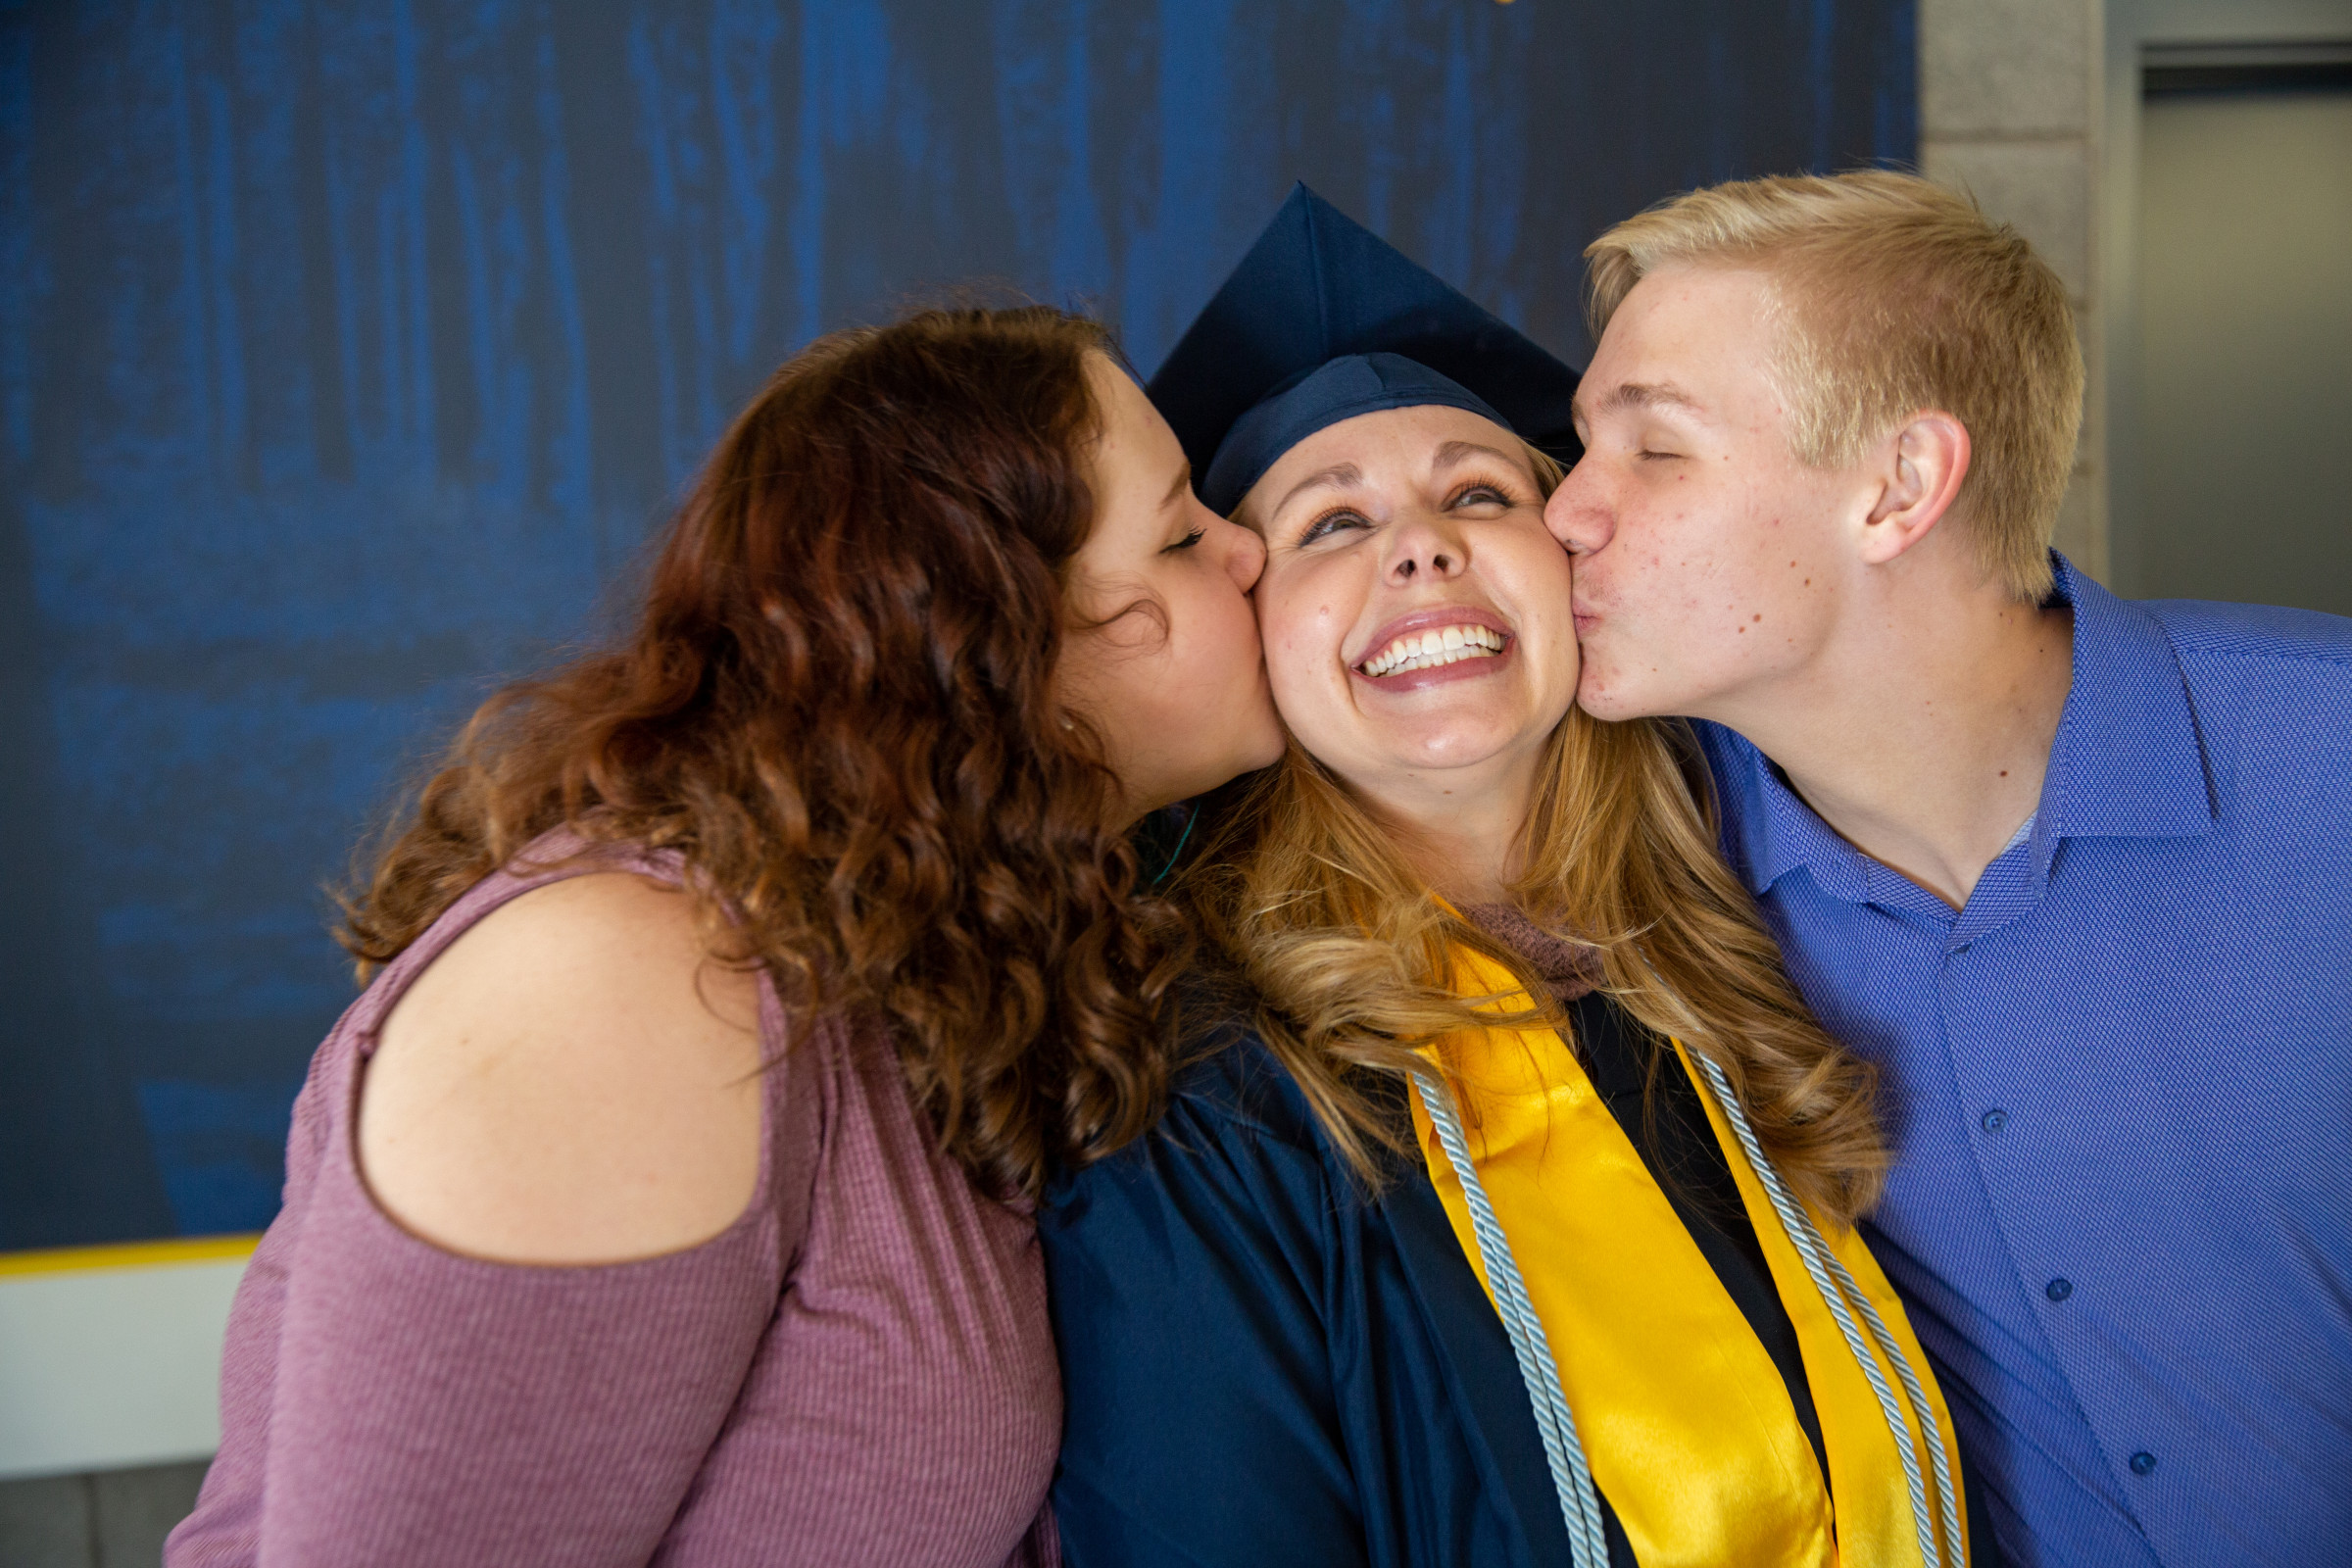 A smiling young woman in graduation regalia gets a kiss on both cheeks from friends.